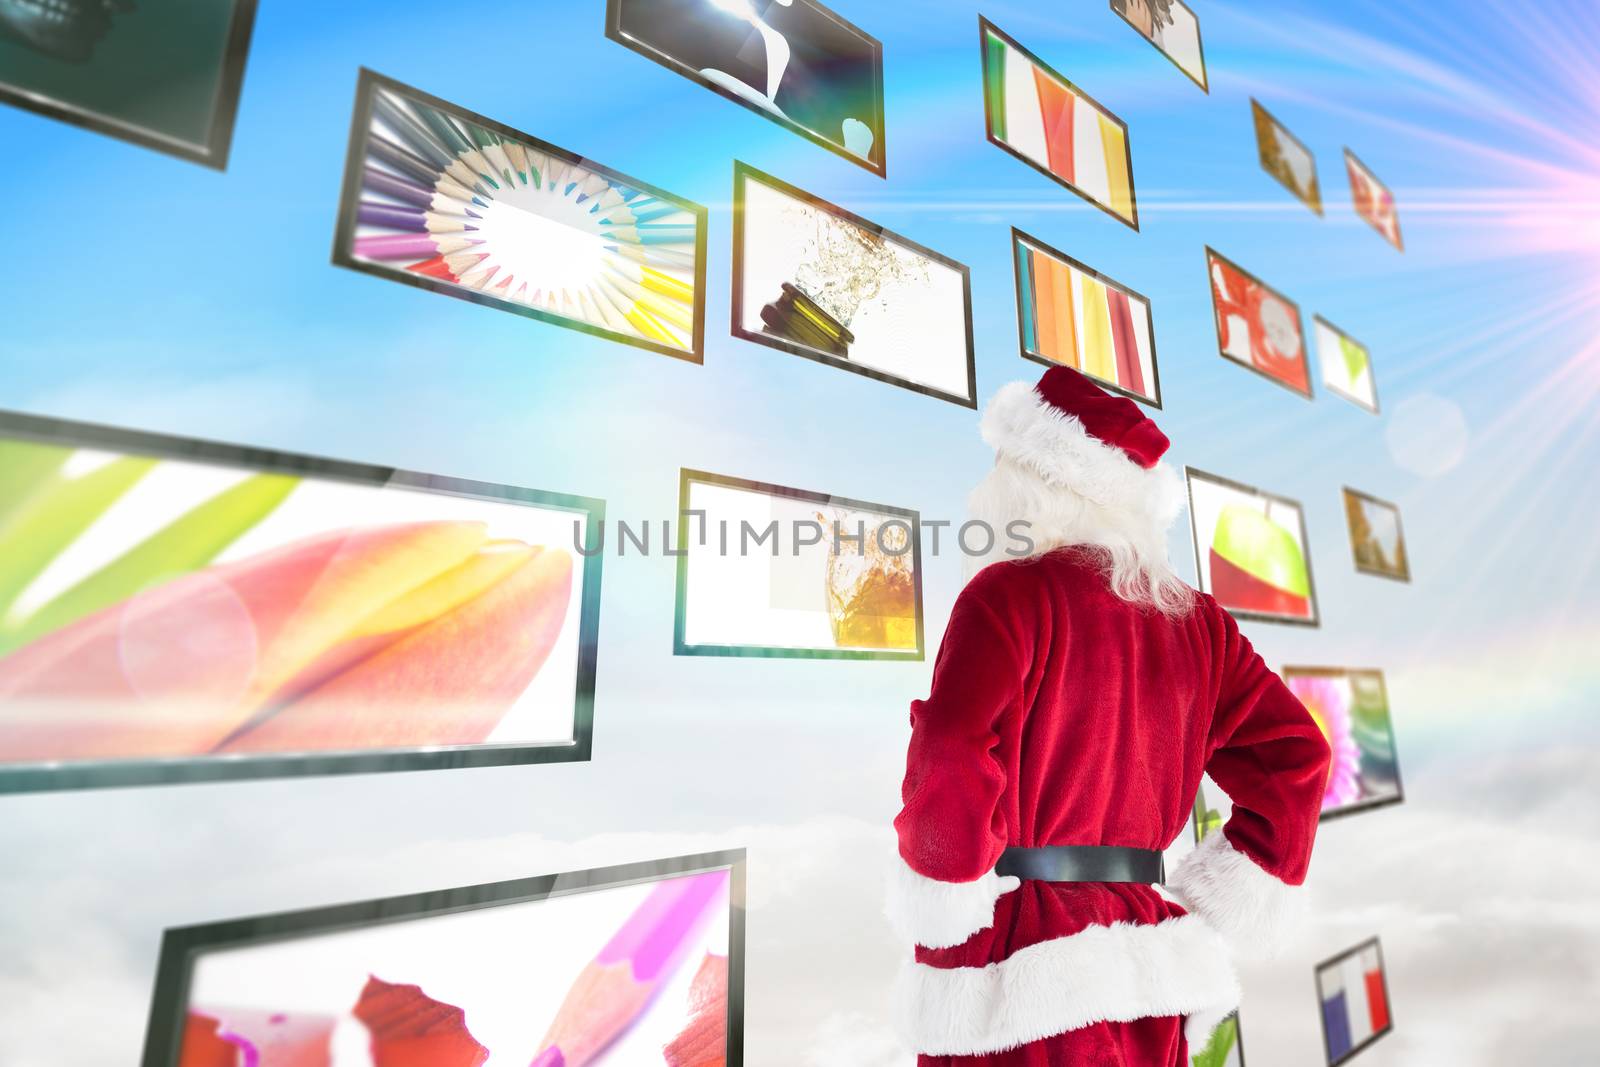 Santa looks away from the camera against screen collage showing lifestyle images